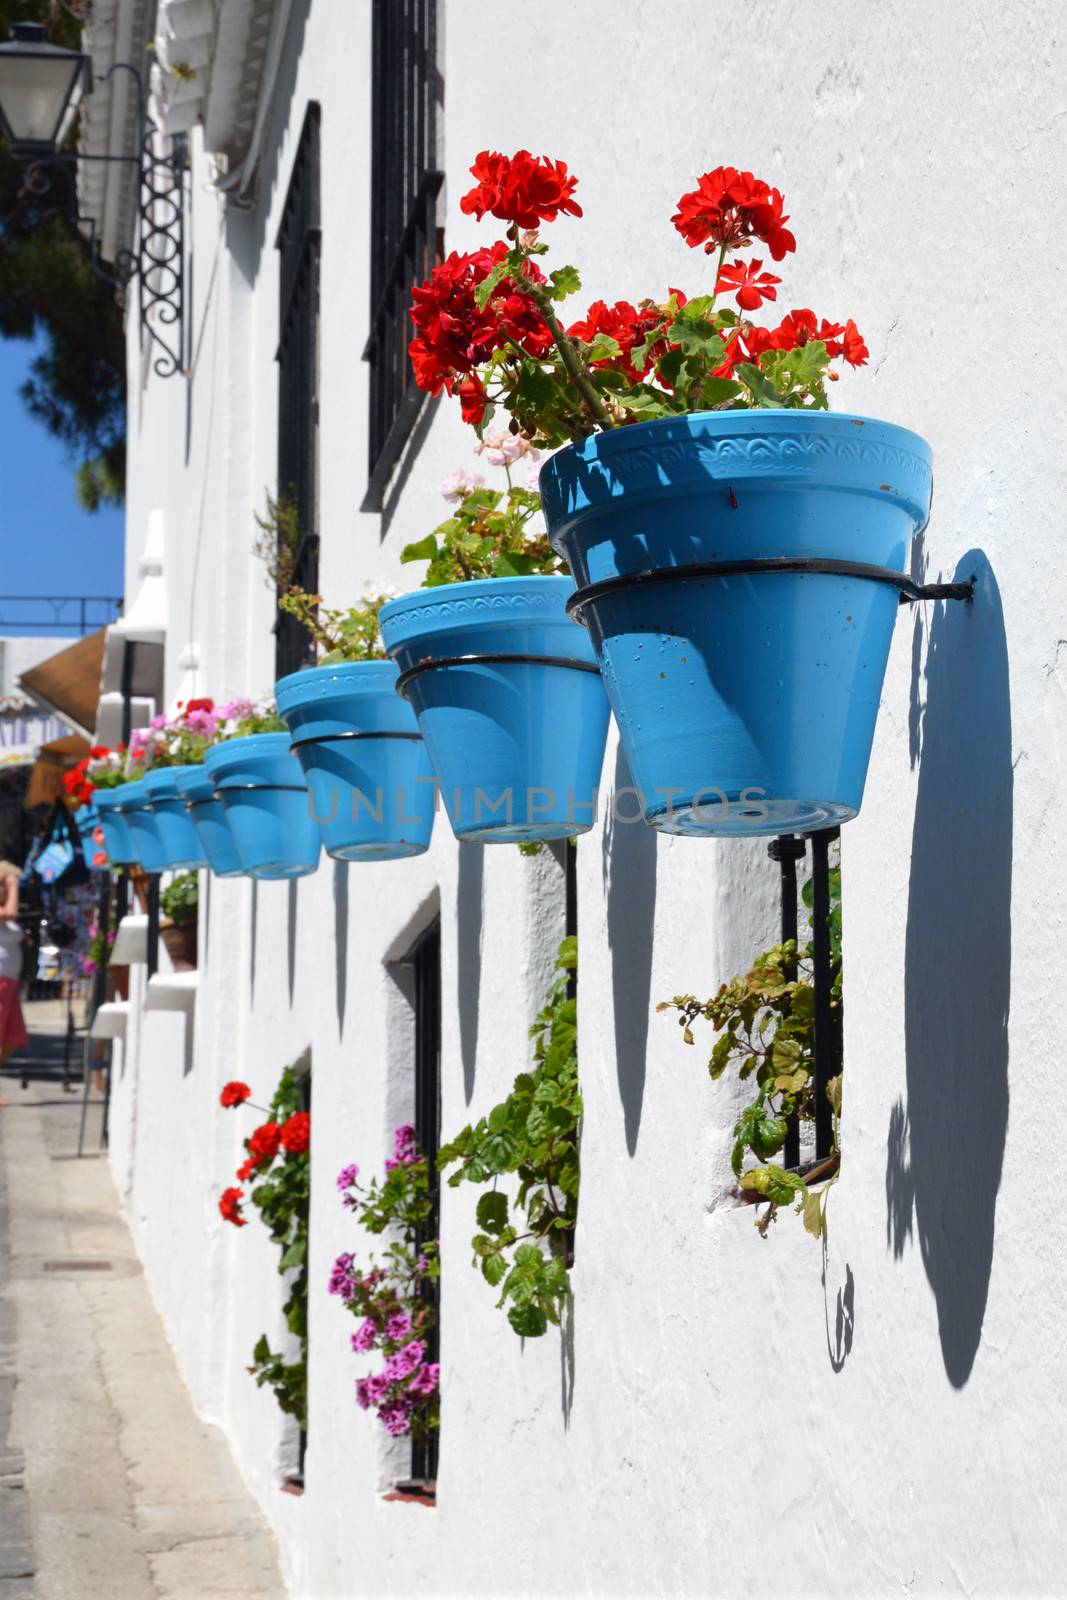 Flowers in a flower pot on the wall
